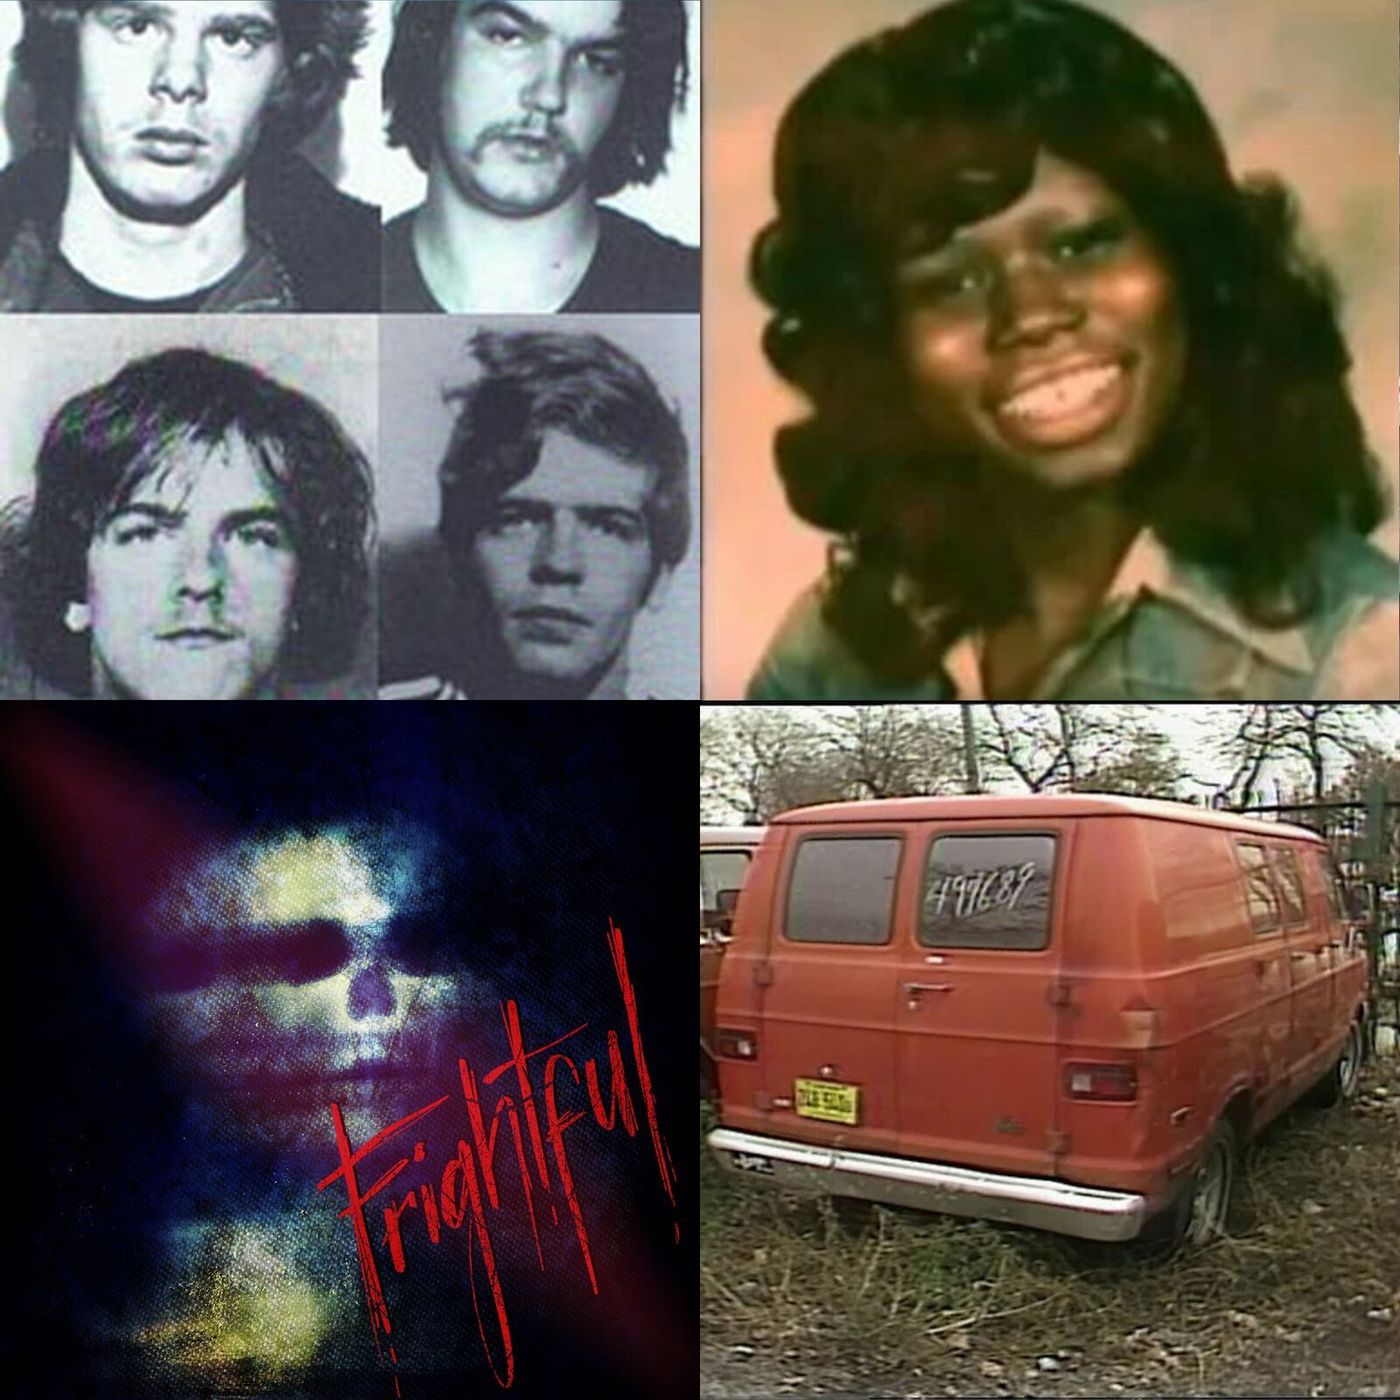 43: The Chicago Ripper Crew, Part 2